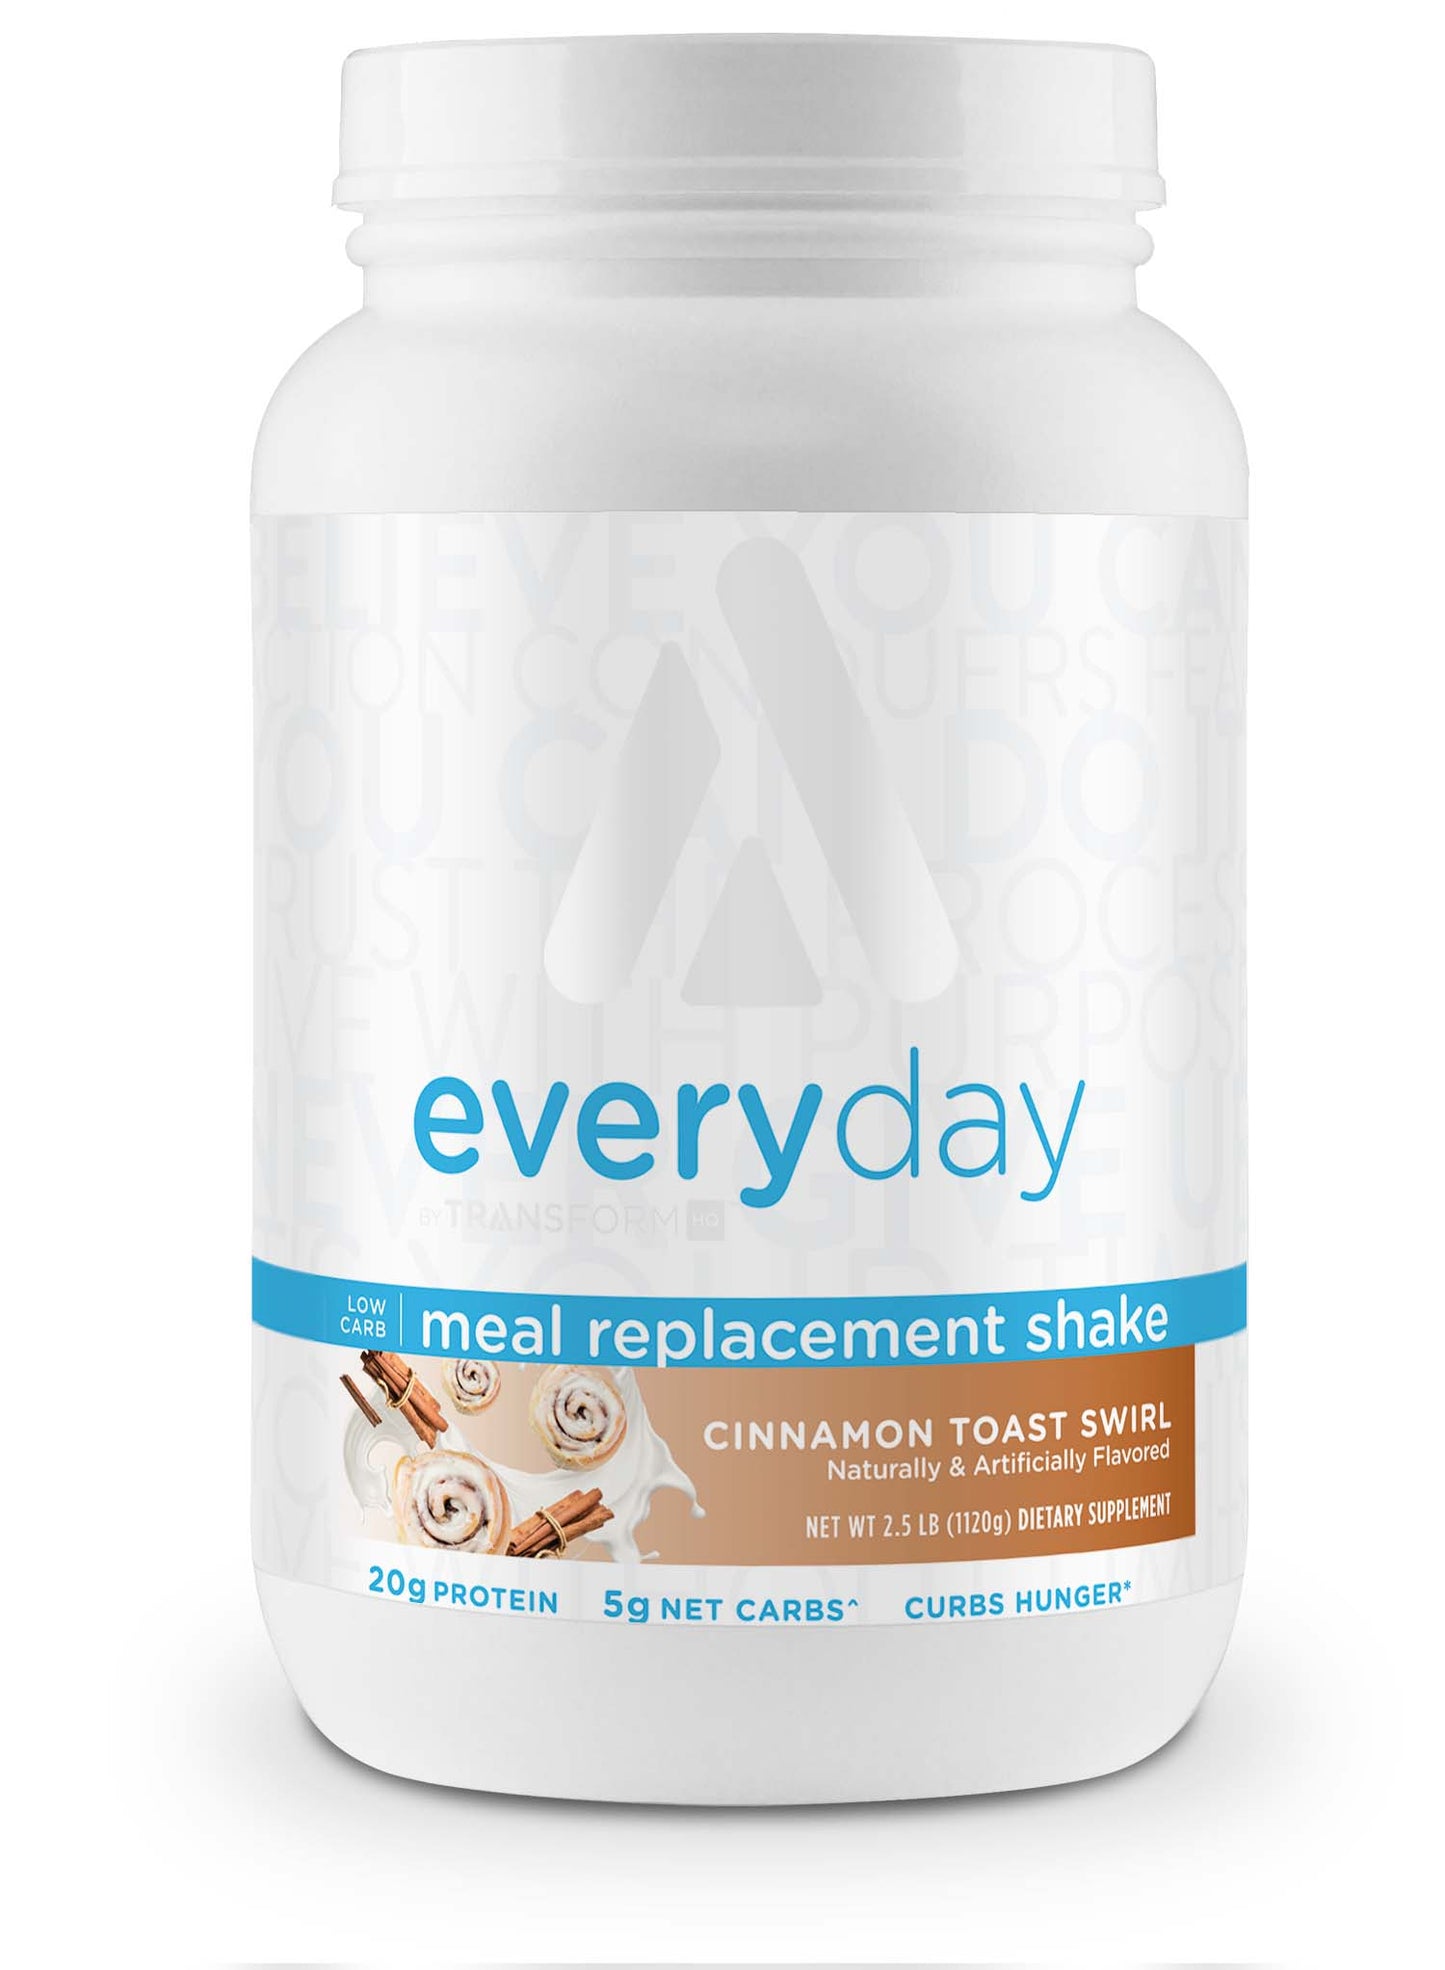 TransformHQ Meal Replacement Shakes